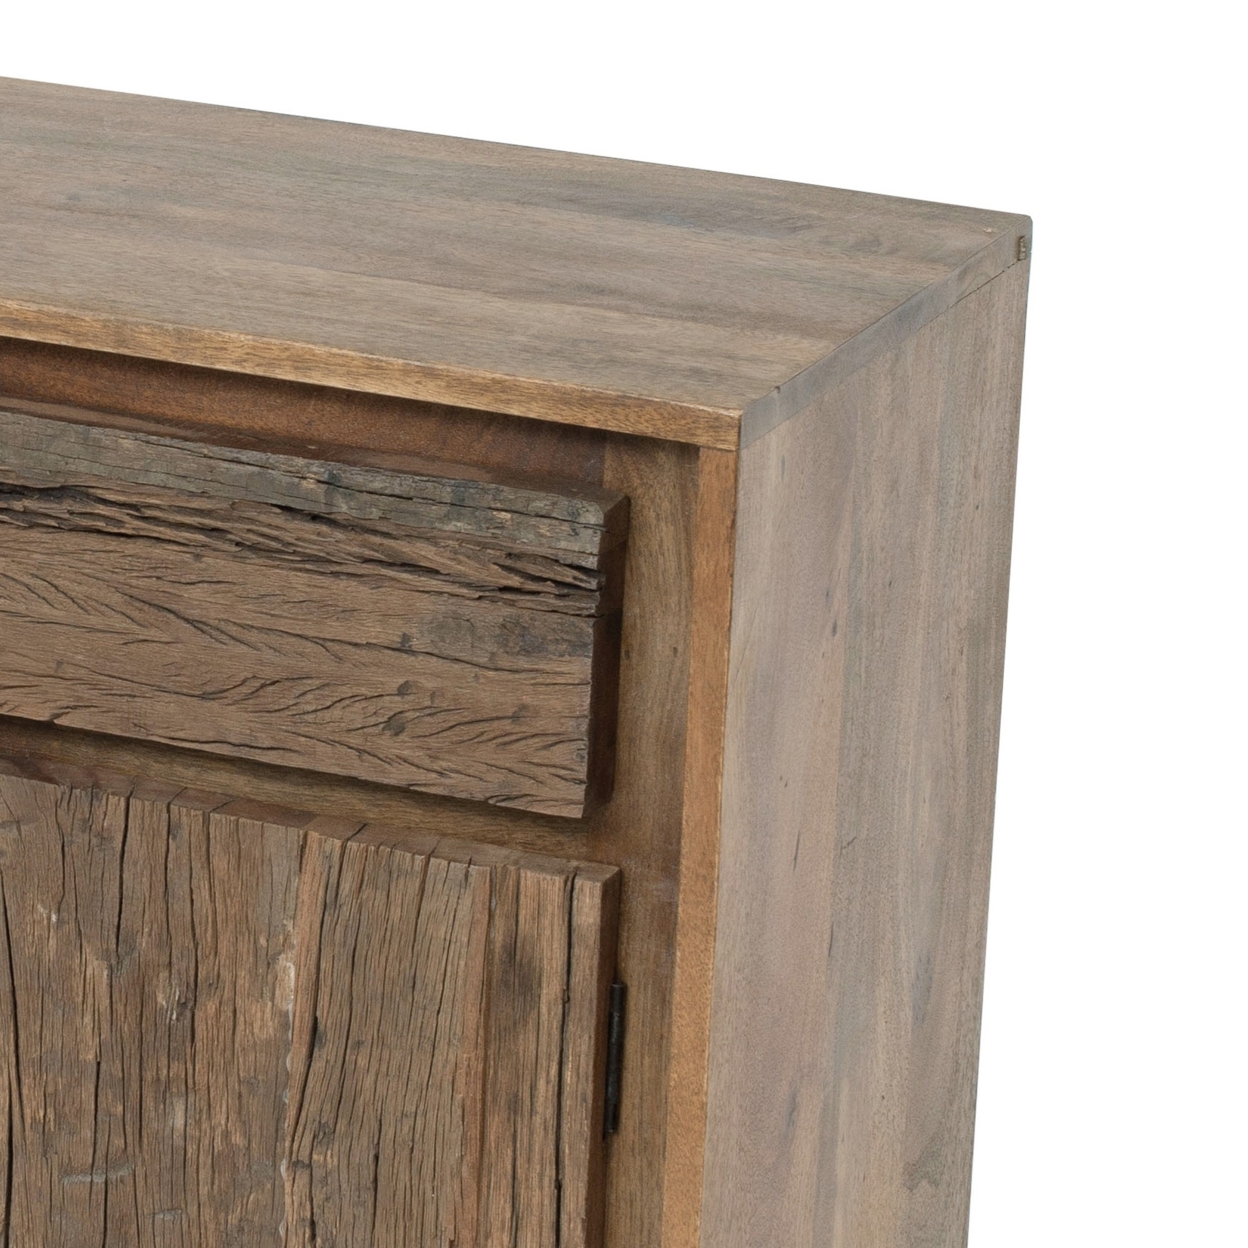 31 Inch Side Cabinet Console, 2 Doors And Drawers, Acacia, Mango Wood Brown- Saltoro Sherpi